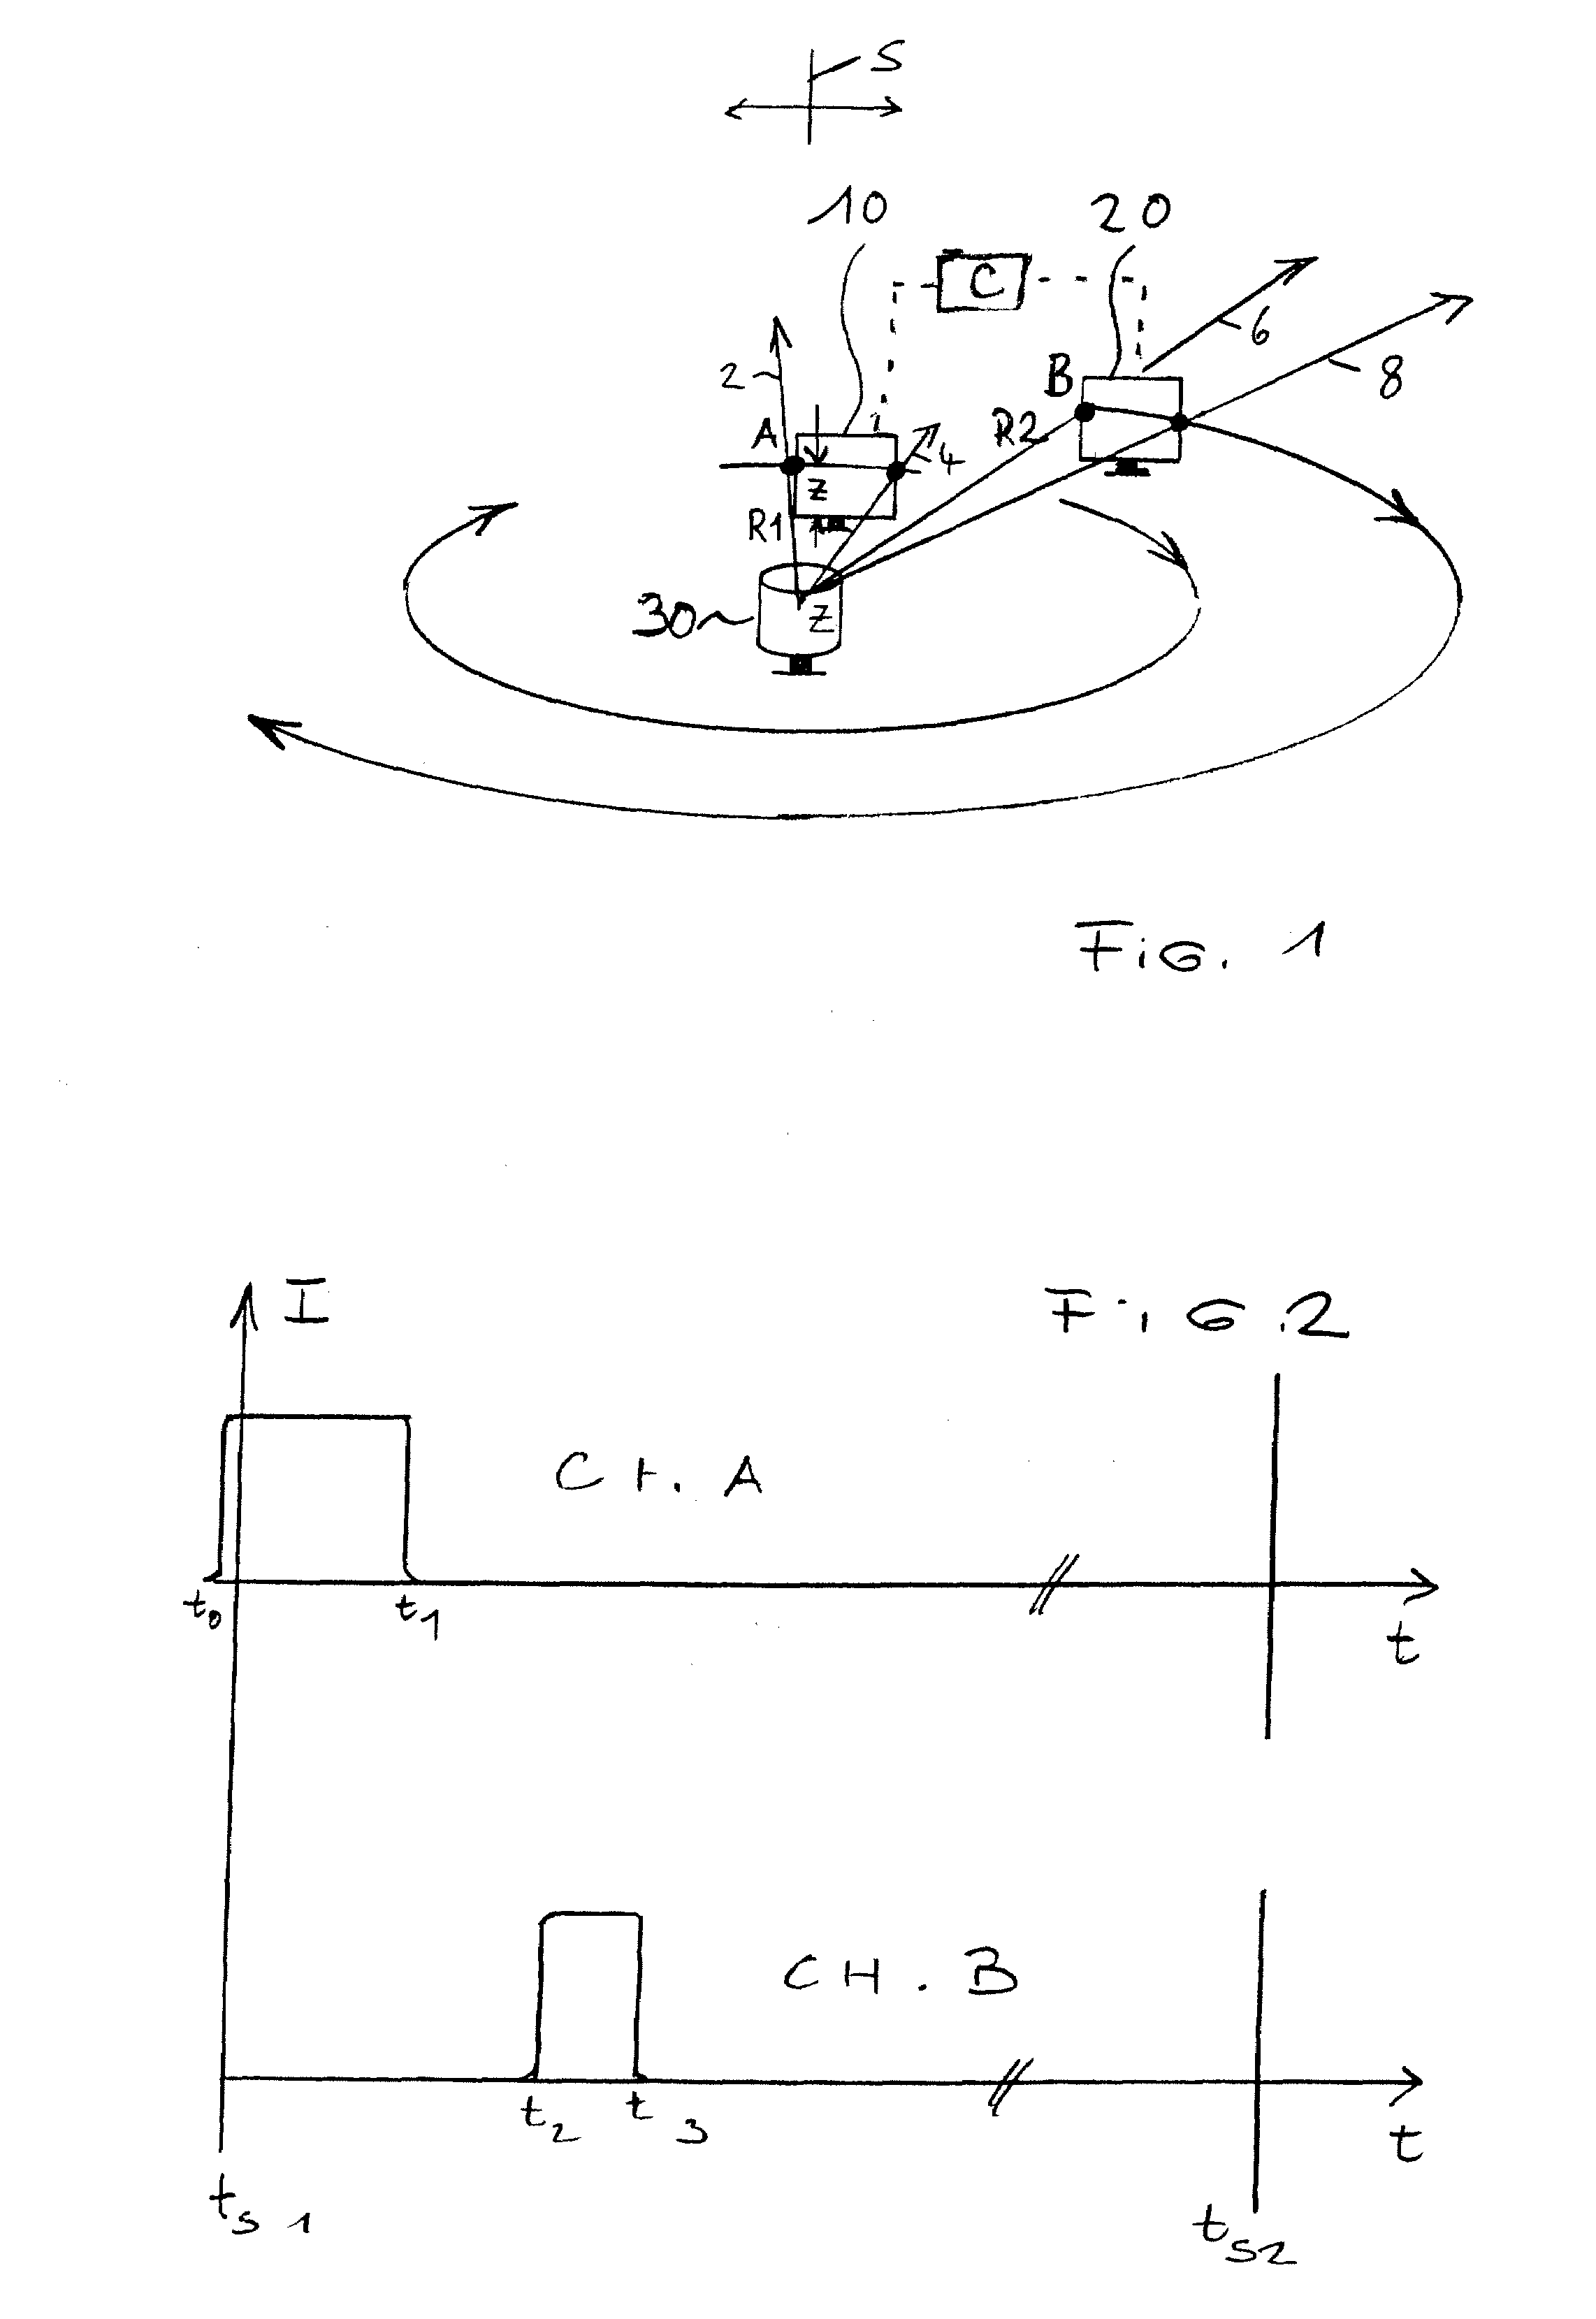 Method of determining the flatness of a foundation to which a building structure, machinery or equipment is to be mounted